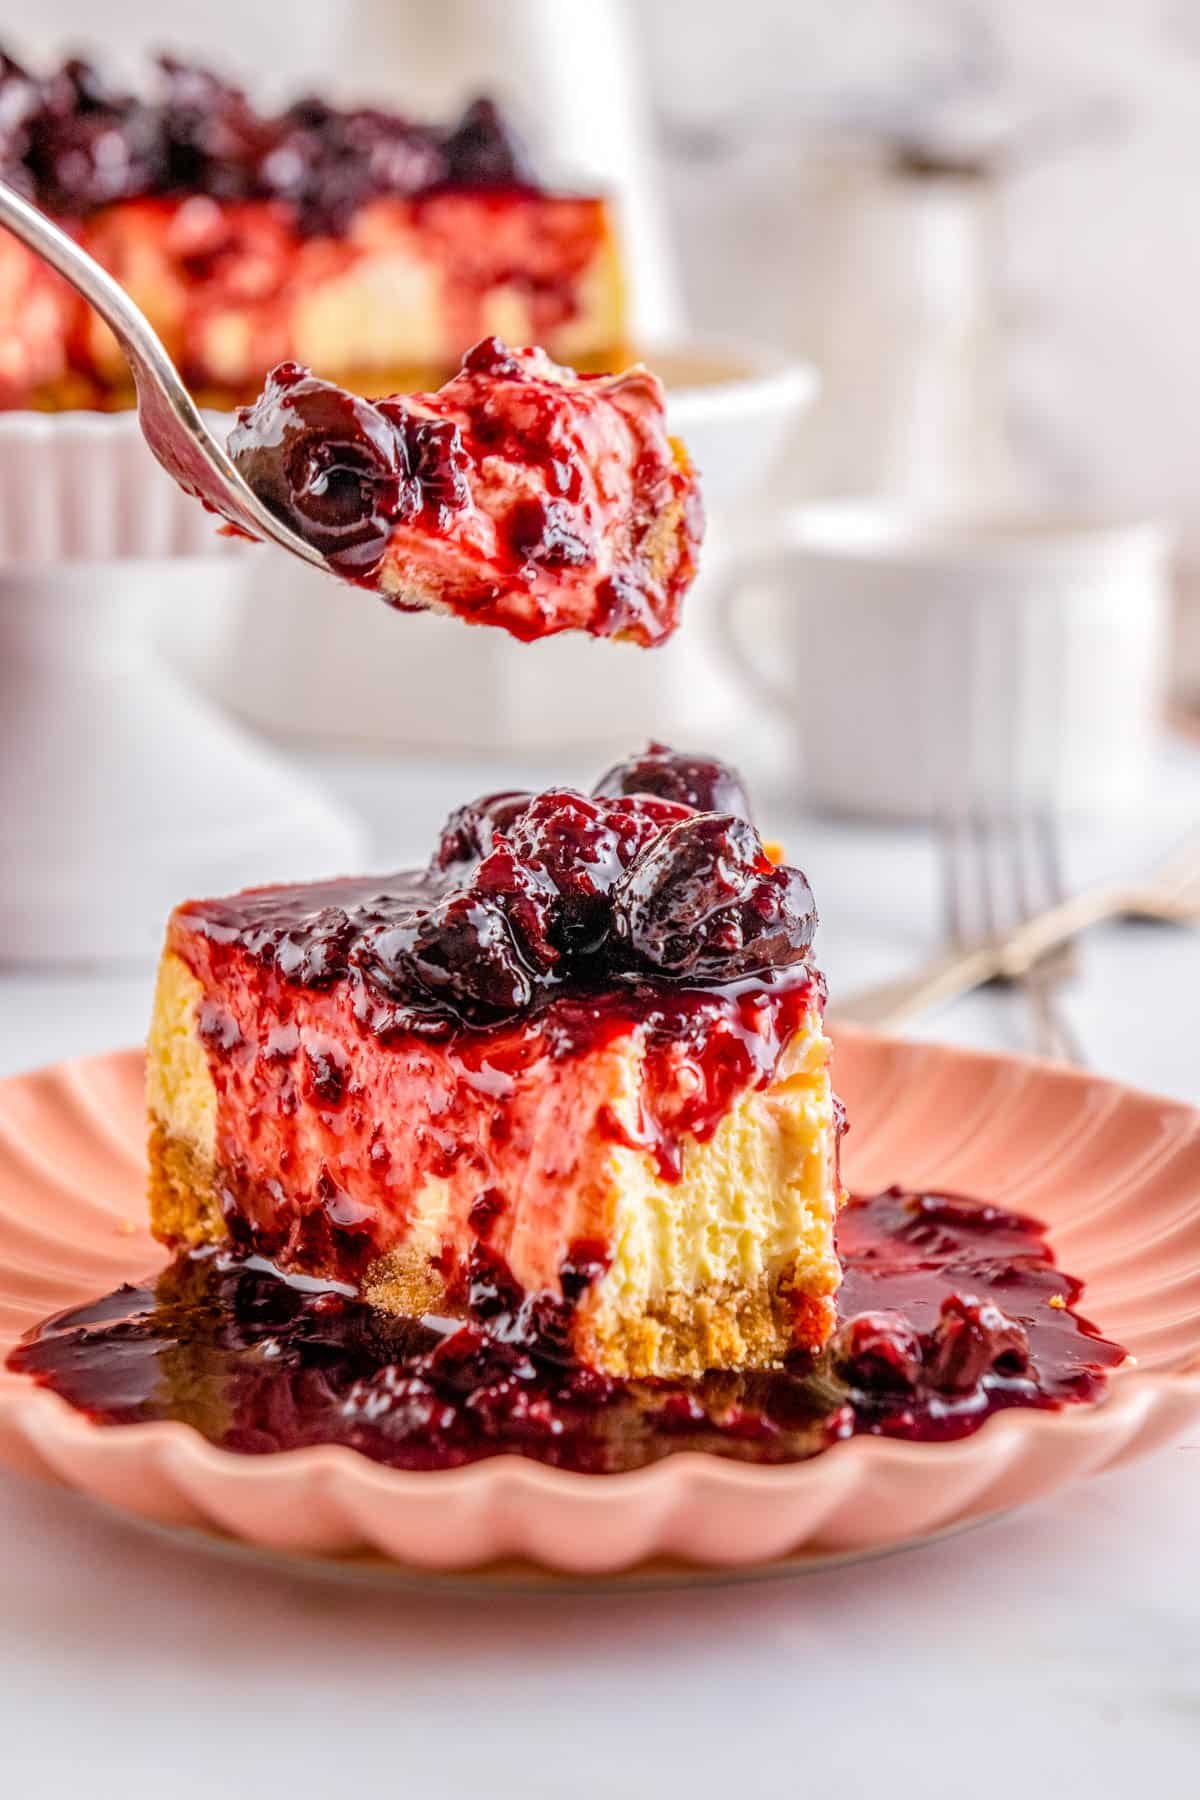 A fork taking a forkful of a slice of a Homemade Cherry Cheesecake.